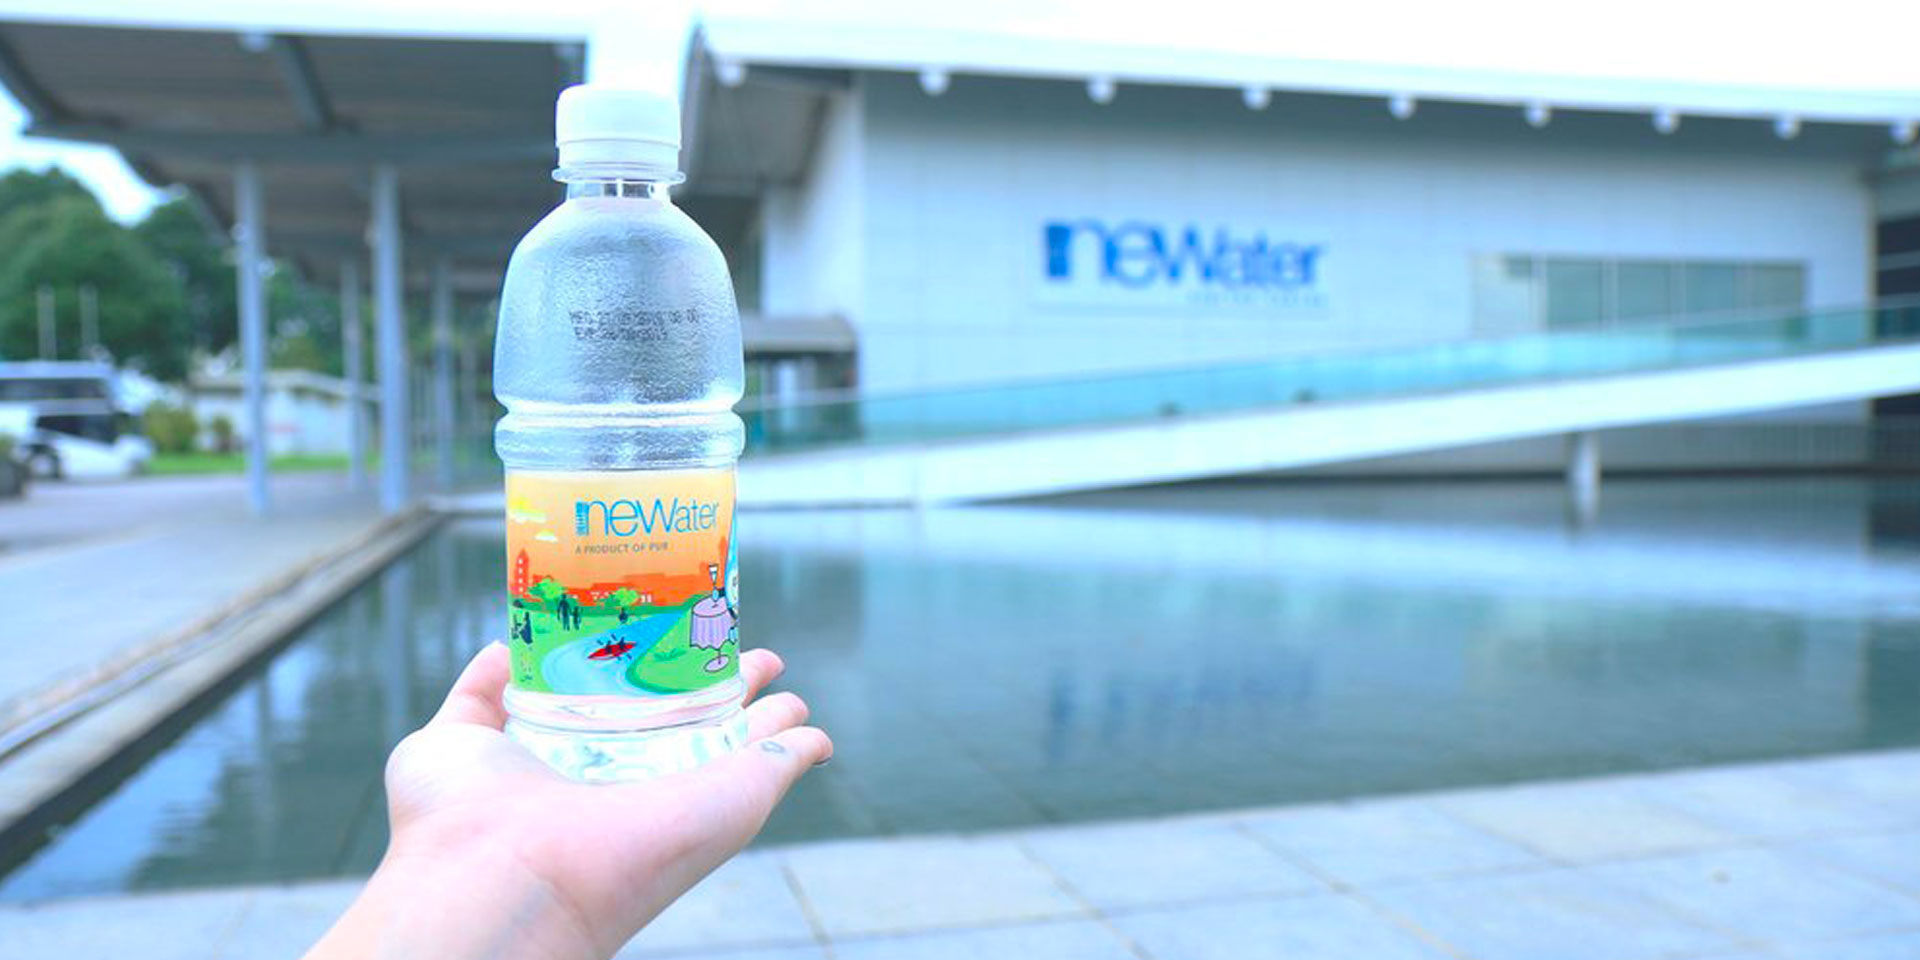 NEWater against water scarce